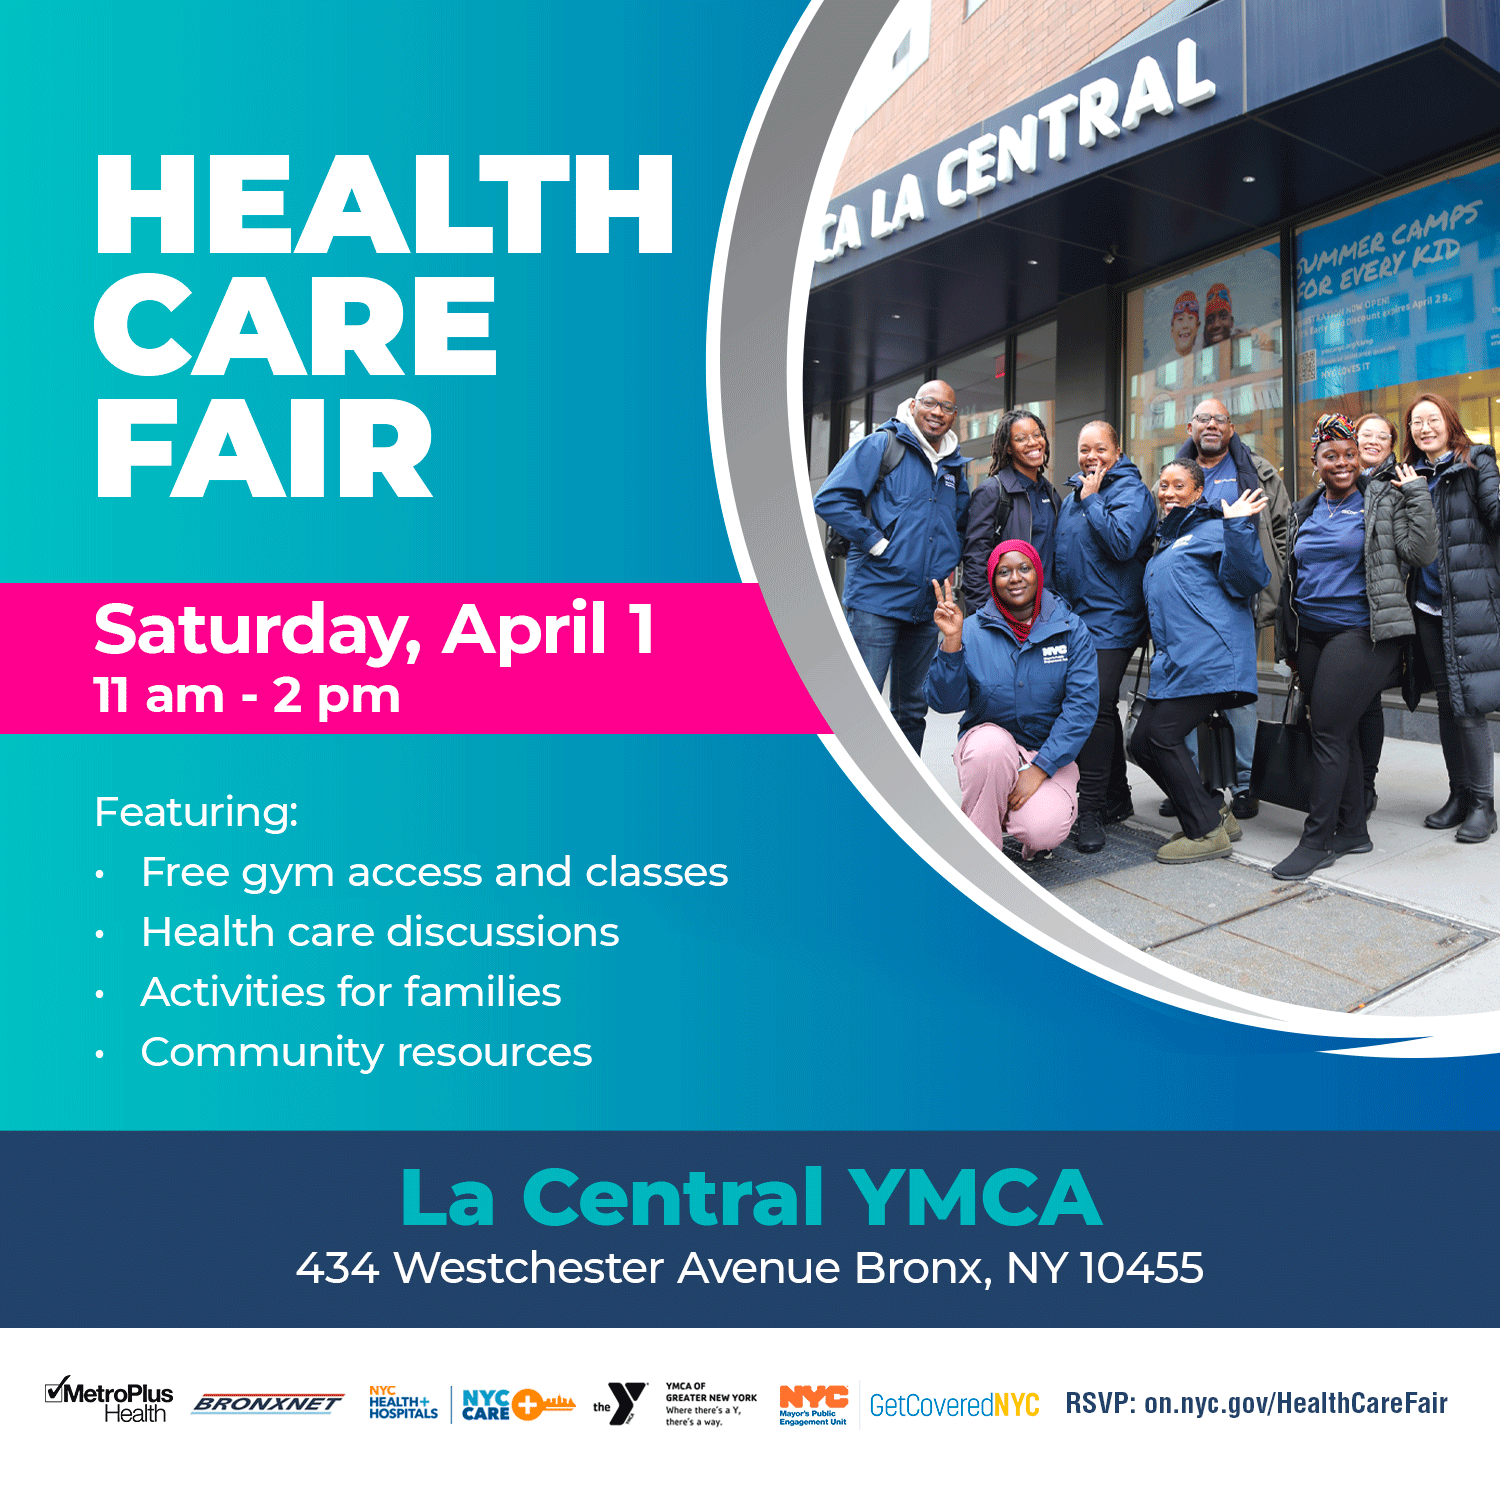 Flyer for health care fair with photos of event location (La Central YMCA) and GetCoveredNYC Specialists, along with logos from event partners: BronxNet, NYC Care, YMCA La Central, and GetCoveredNYC.